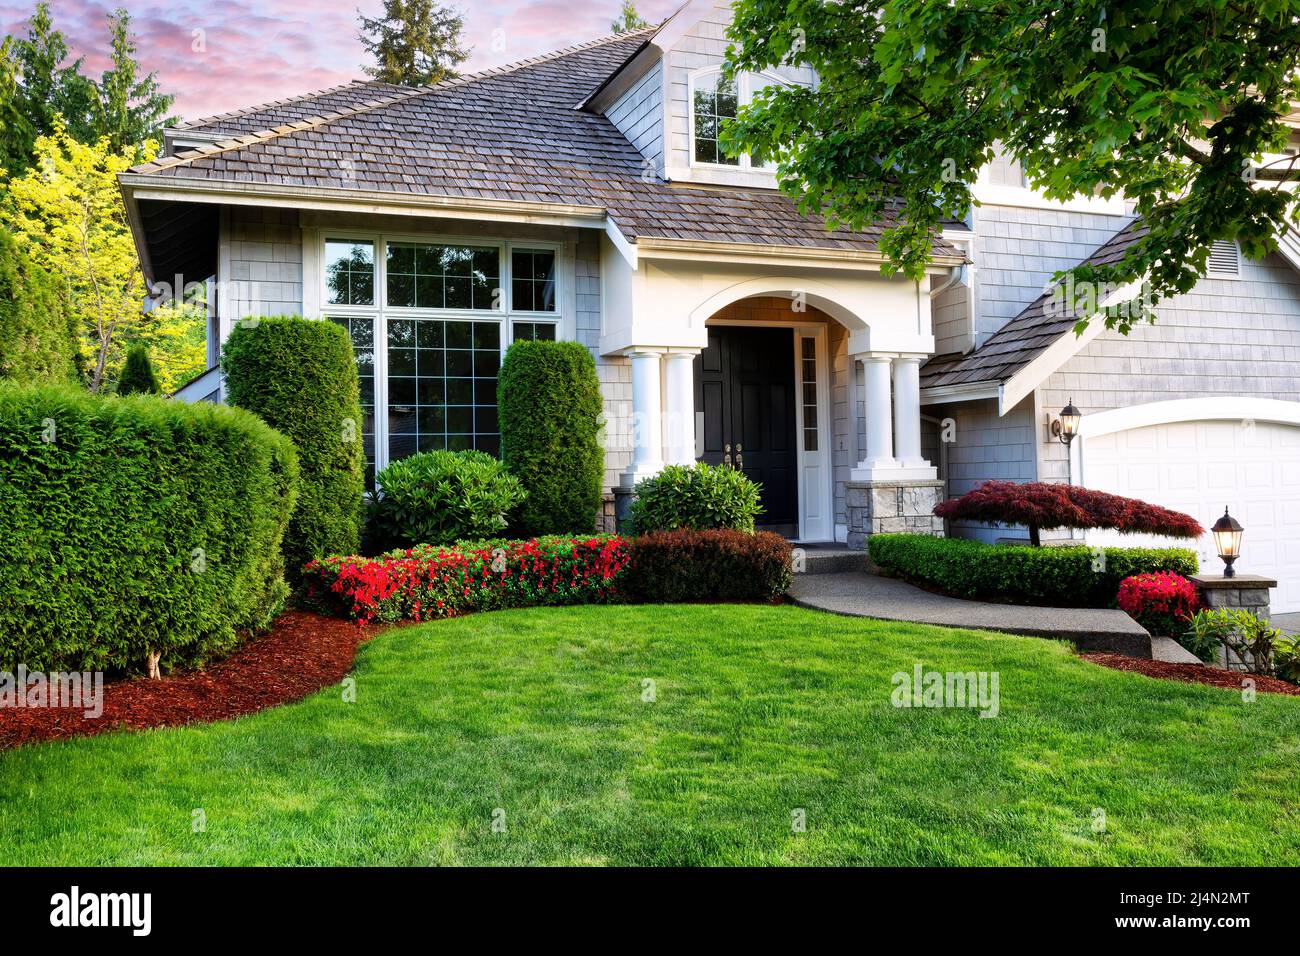 Beautiful home exterior in evening with manicured green lawn and blooming red flowers in bushes Stock Photo